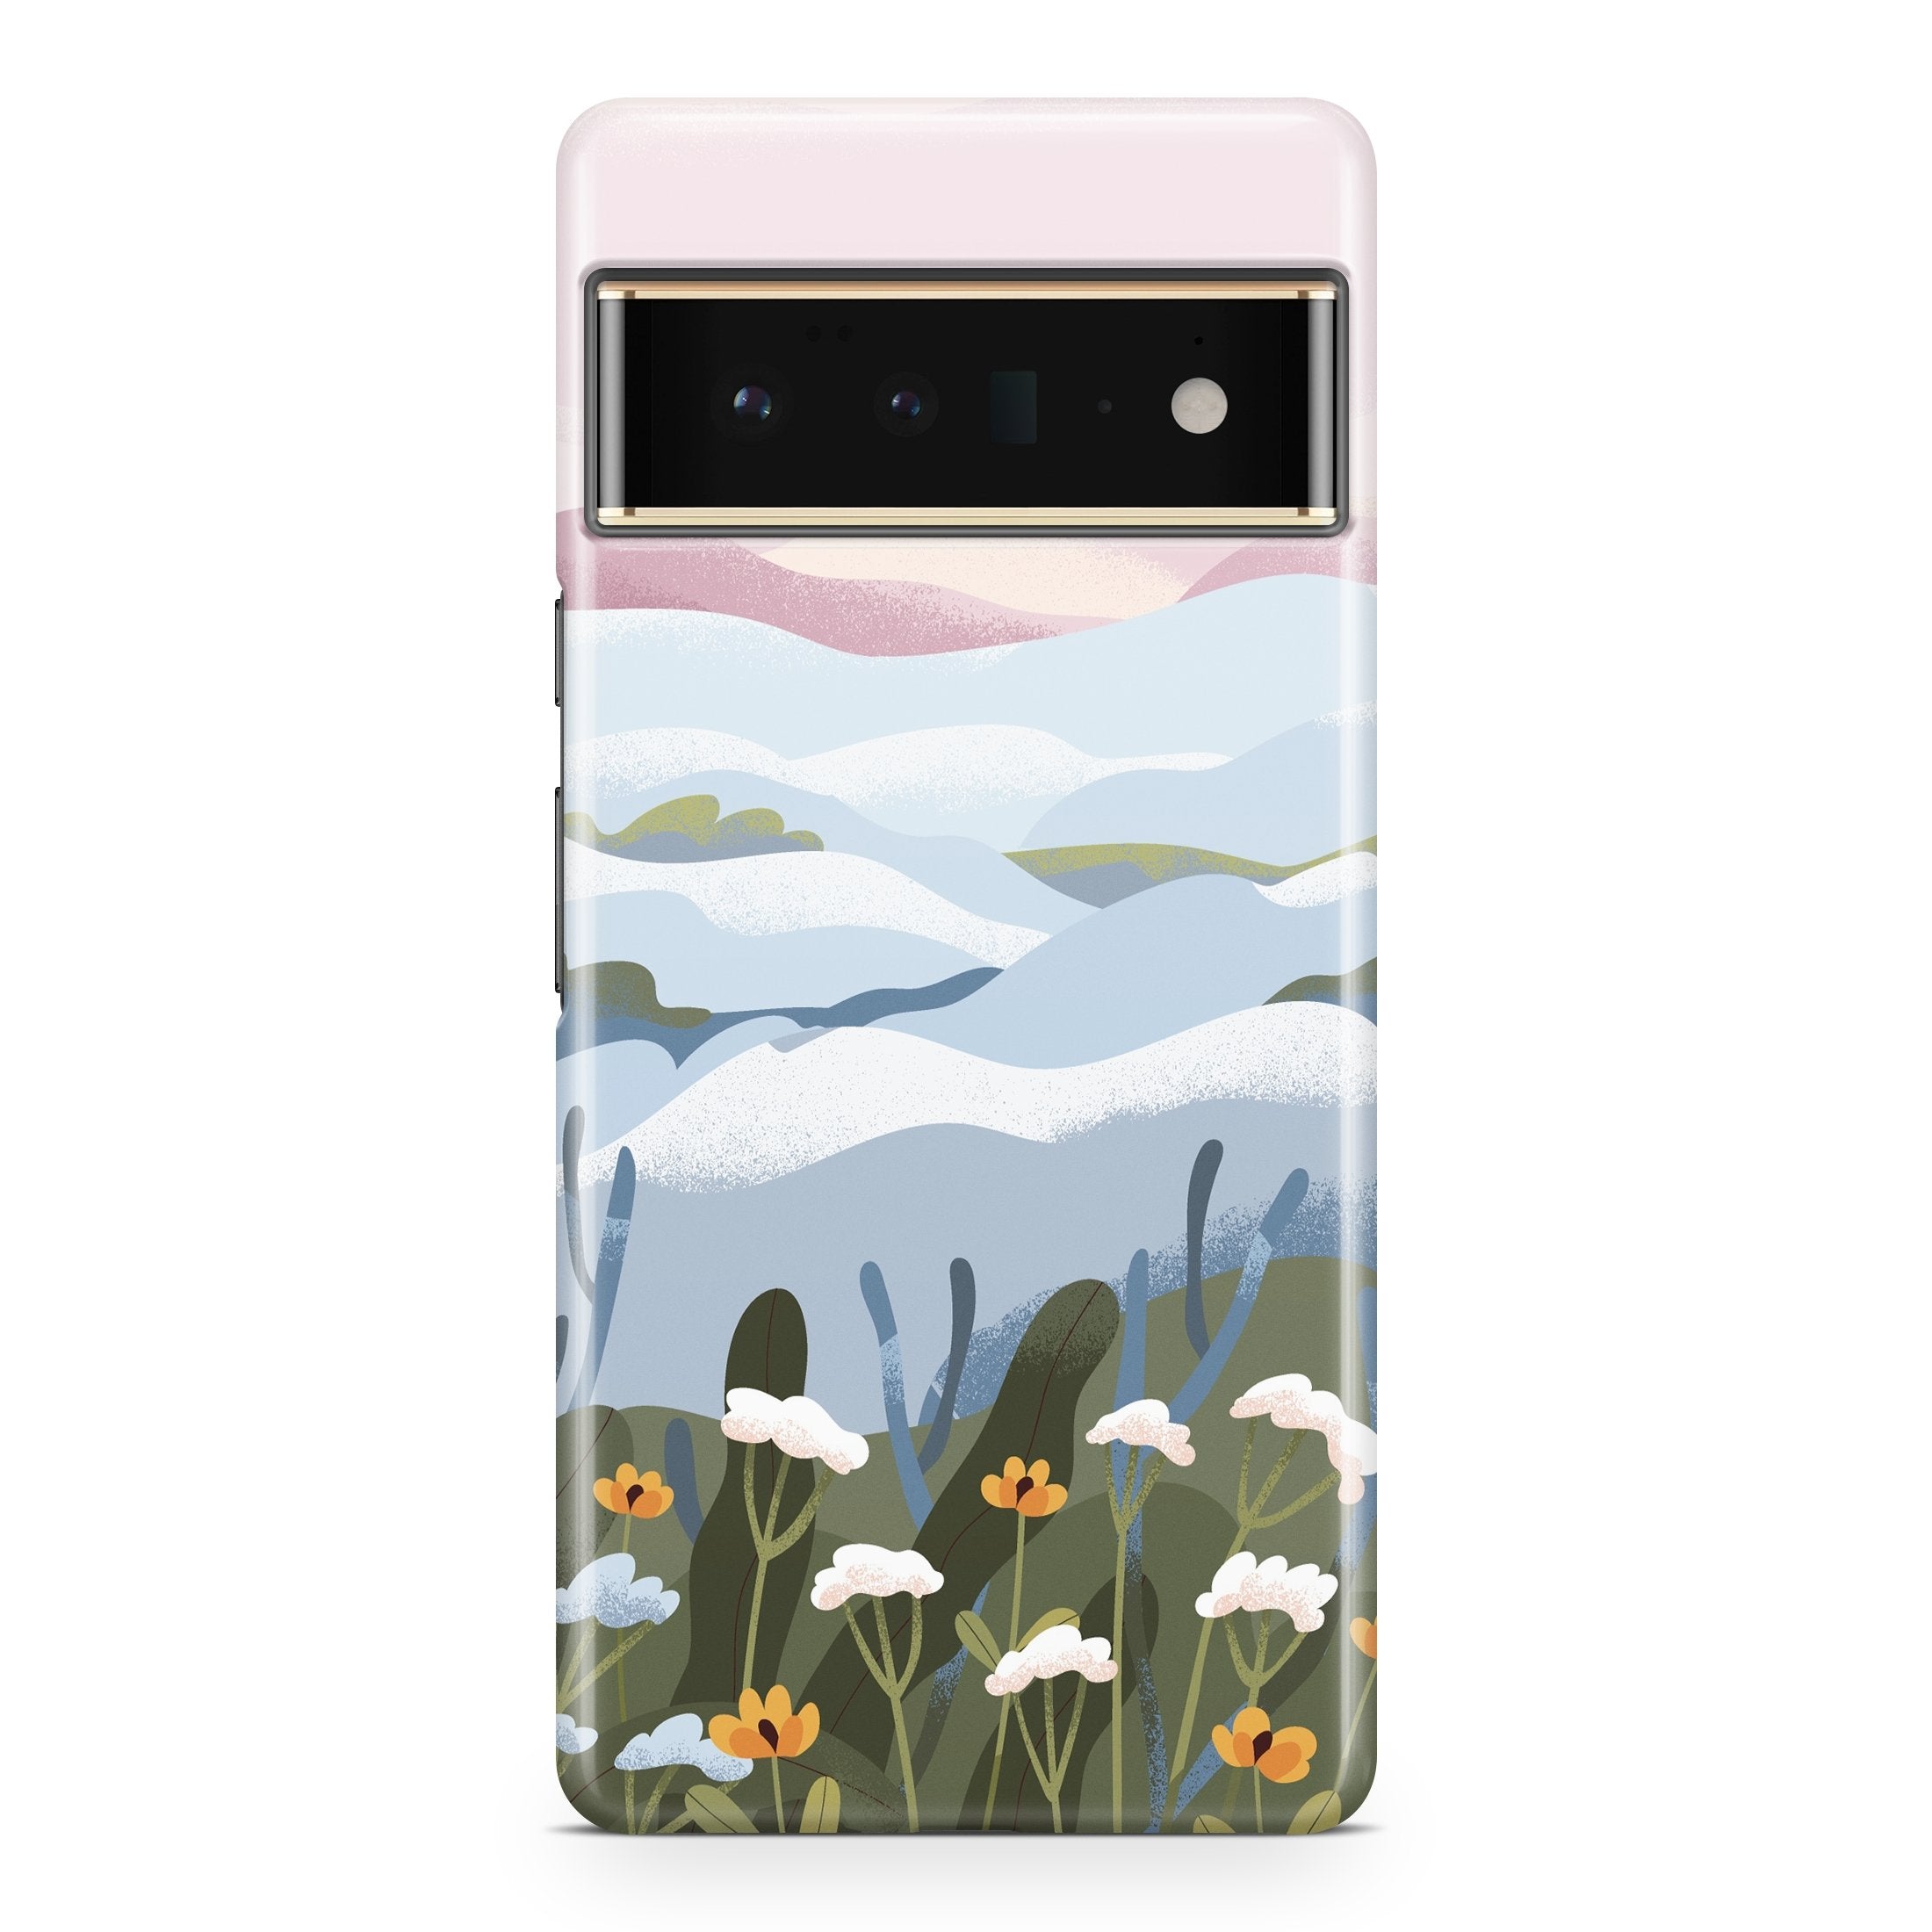 Watercolor Nature - Google phone case designs by CaseSwagger